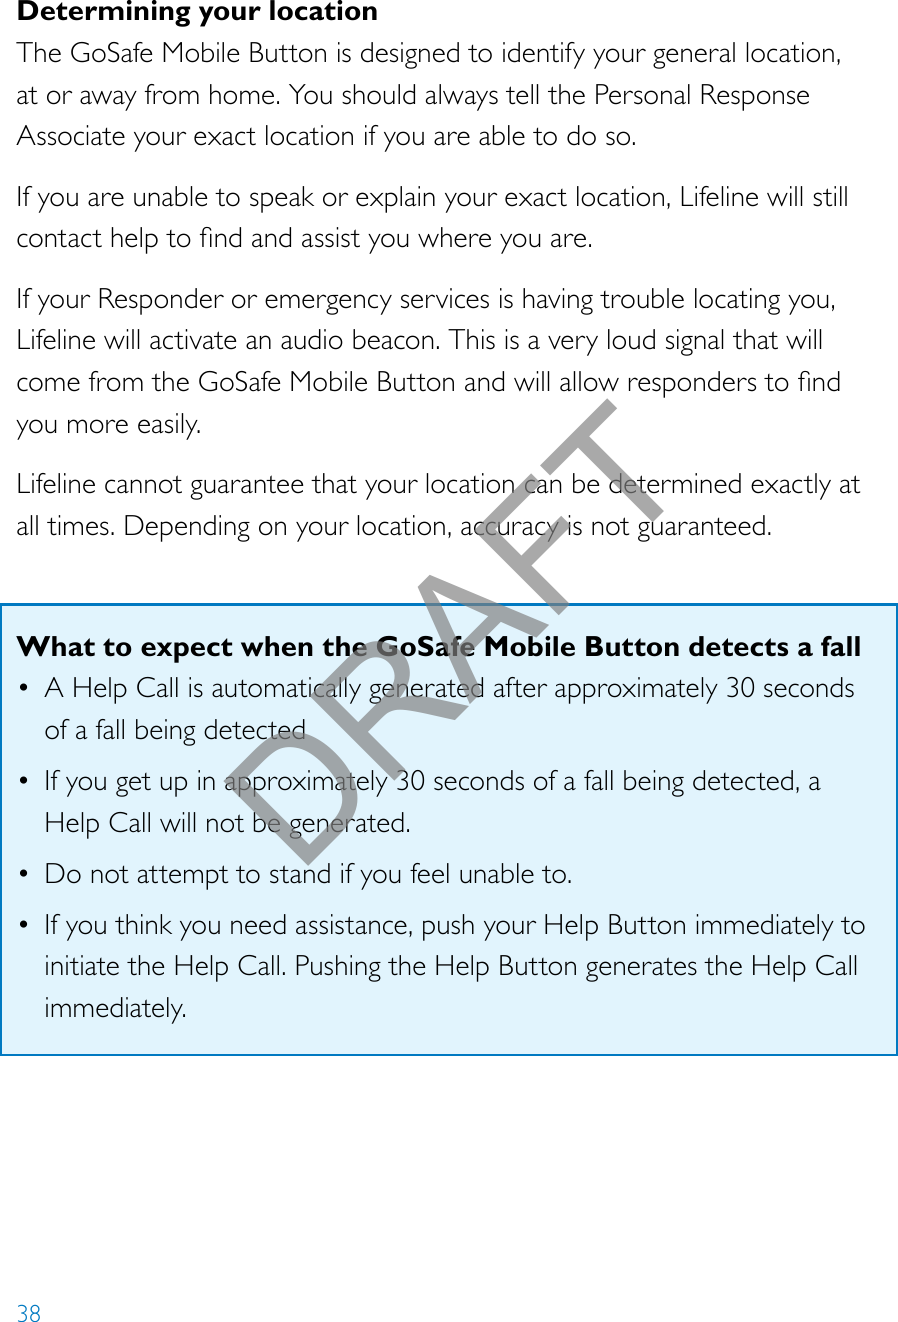 38Determining your locationThe GoSafe Mobile Button is designed to identify your general location, at or away from home. You should always tell the Personal Response Associate your exact location if you are able to do so.If you are unable to speak or explain your exact location, Lifeline will still contacthelptondandassistyouwhereyouare.If your Responder or emergency services is having trouble locating you, Lifeline will activate an audio beacon. This is a very loud signal that will comefromtheGoSafeMobileButtonandwillallowresponderstondyou more easily. Lifeline cannot guarantee that your location can be determined exactly at all times. Depending on your location, accuracy is not guaranteed.What to expect when the GoSafe Mobile Button detects a fall• A Help Call is automatically generated after approximately 30 seconds of a fall being detected• If you get up in approximately 30 seconds of a fall being detected, a Help Call will not be generated.• Do not attempt to stand if you feel unable to.• If you think you need assistance, push your Help Button immediately to initiate the Help Call. Pushing the Help Button generates the Help Call immediately.DRAFT